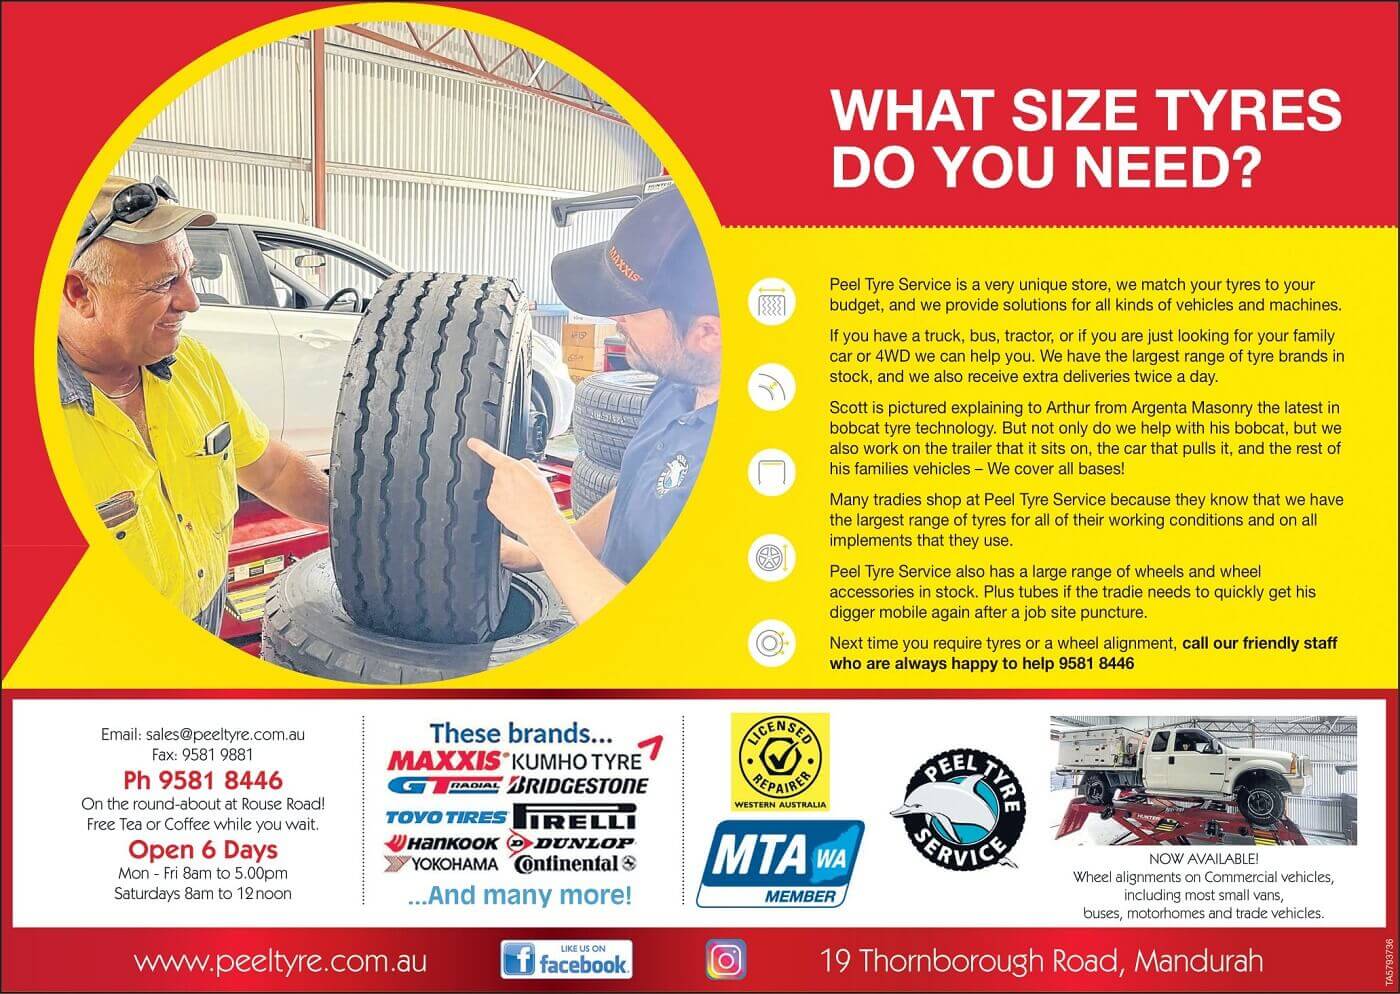 What size tyres do you need?